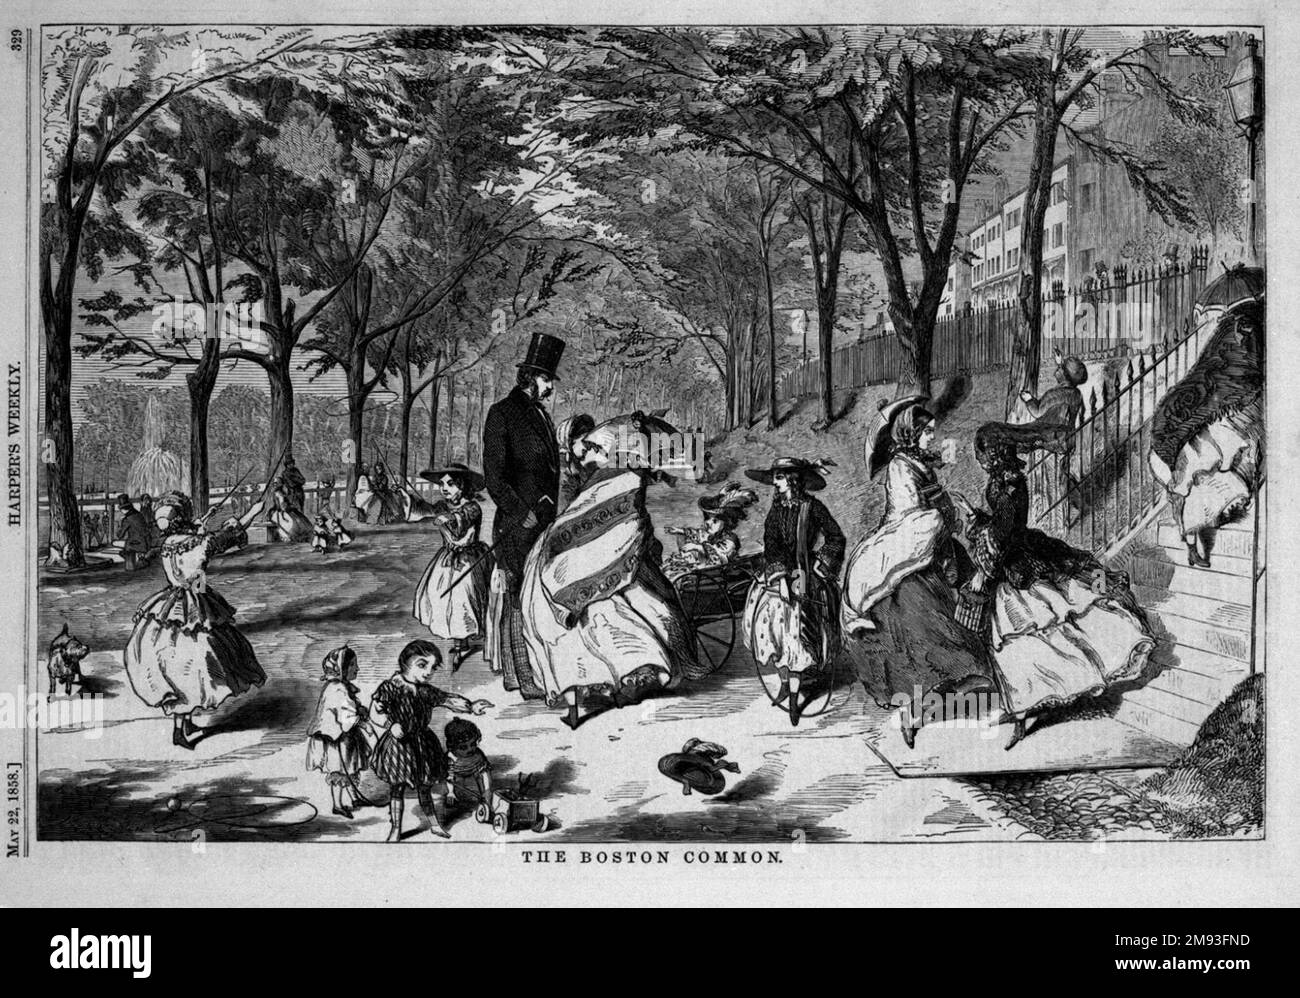 The Boston Common Winslow Homer (American, 1836-1910). , 1858. Wood engraving, Image: 9 1/8 x 13 3/4 in. (23.2 x 34.9 cm).  This early engraving was executed while Homer still resided in his native Boston. Bostonians of Homer’s time were justifiably proud of the Common, as indicated by the Harper’s article that this illustration accompanied: “Take the Common as it stands, with the fountain, and the elm, and the historical associations—and I defy the world to produce its equal.” As a preferred venue for fashionable promenades and the healthinducing recreation of children, the Common was a valua Stock Photo